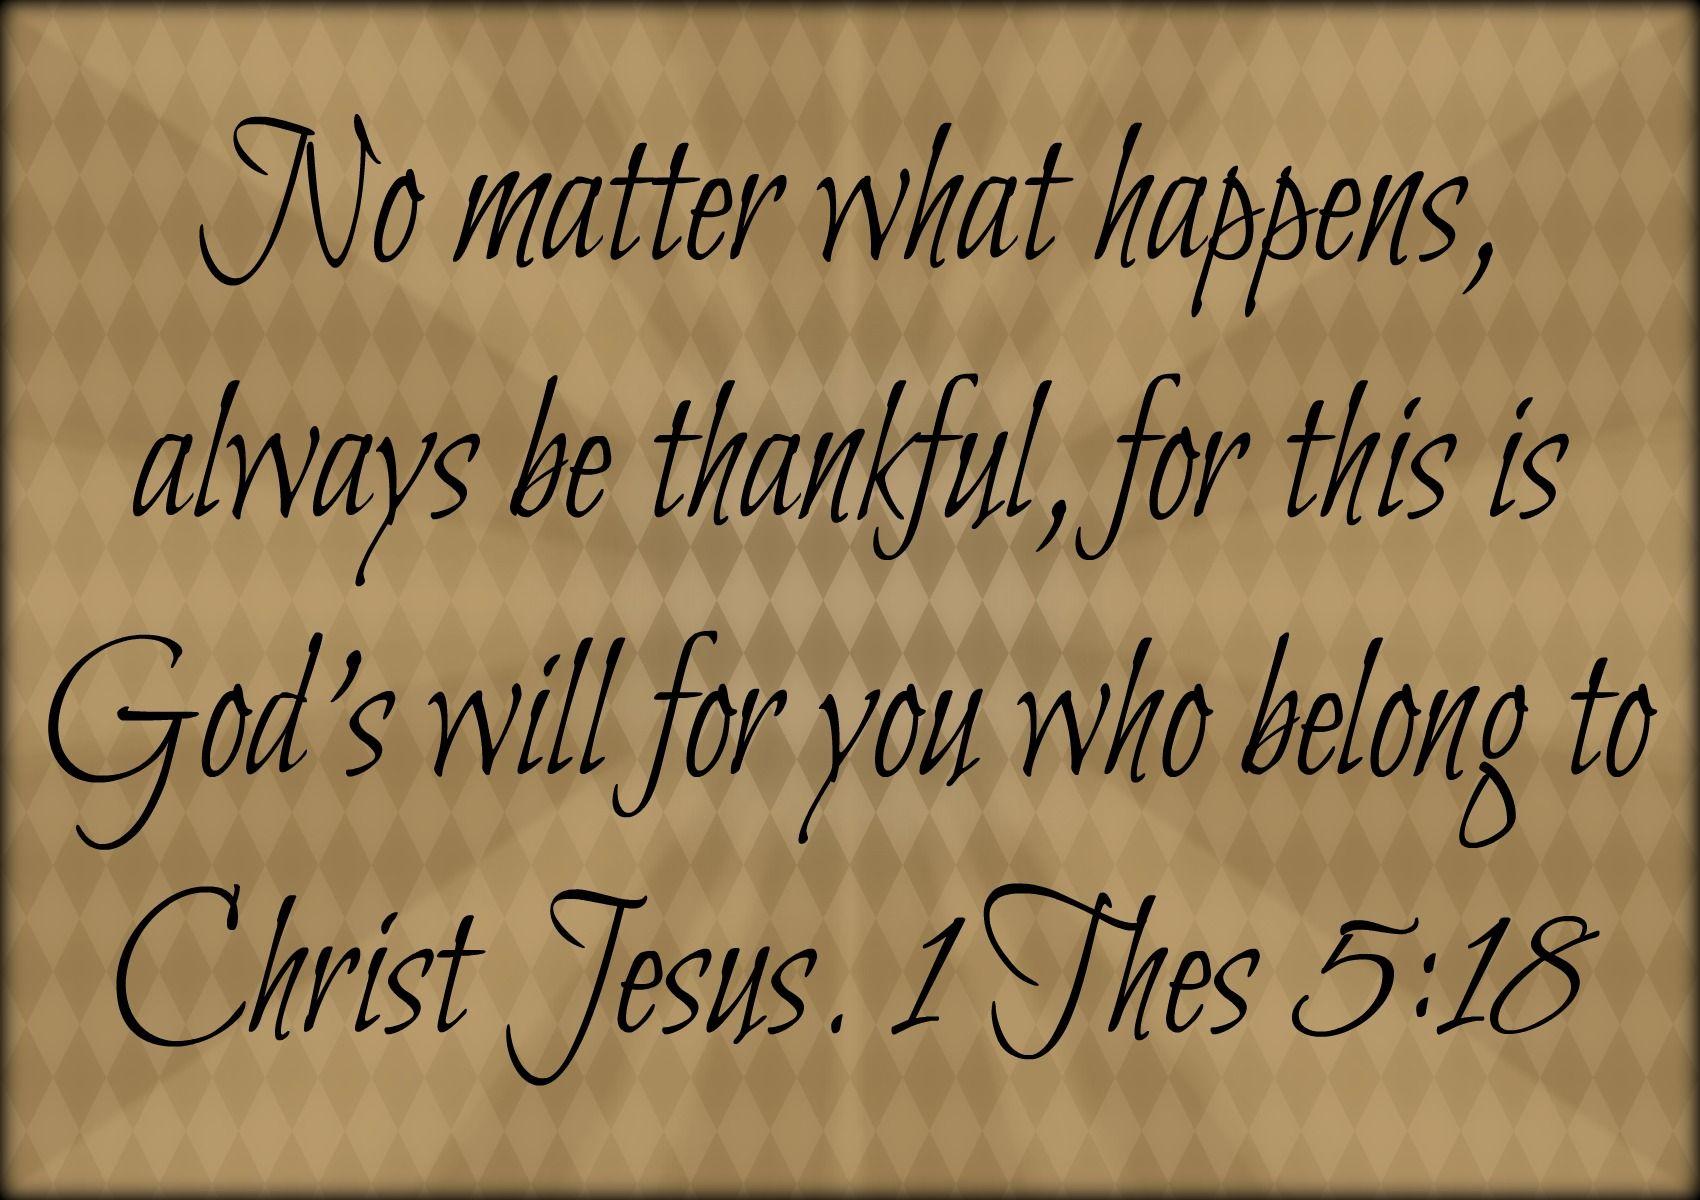 Bible Quotes About Being Thankful Image Wallpaper